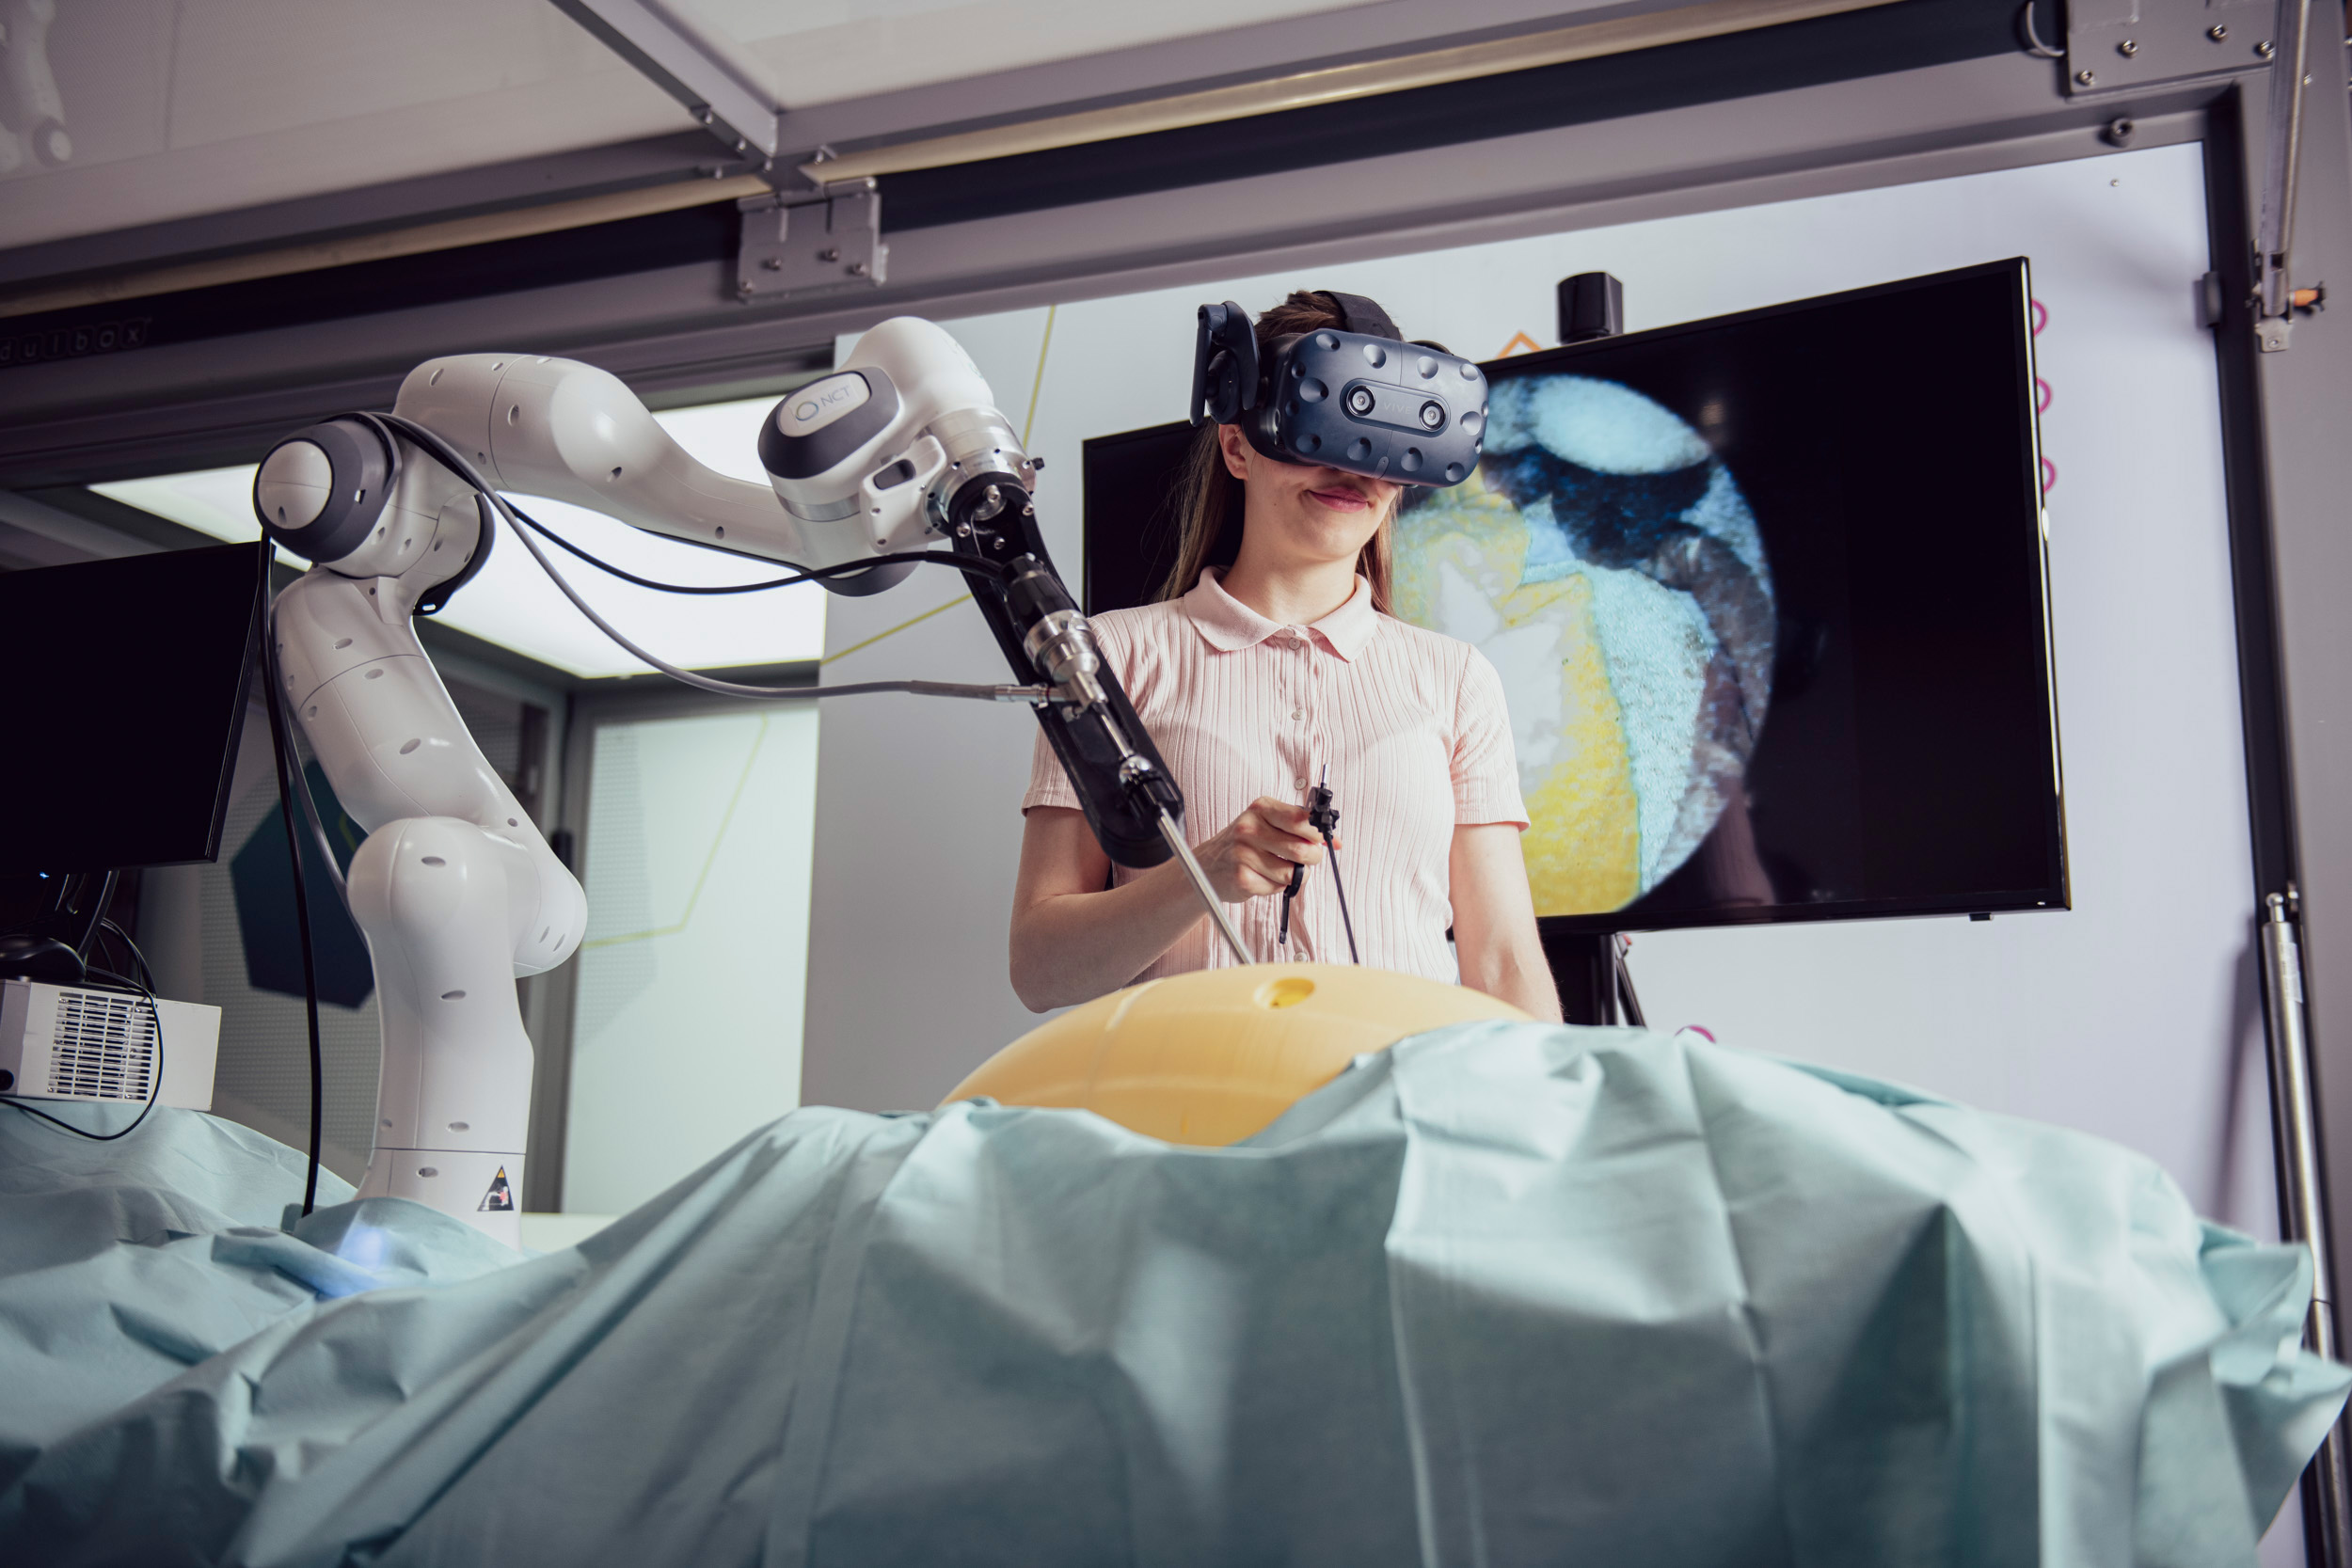 Photograph showing the use of robotic assistance and VR in a laparoscopy